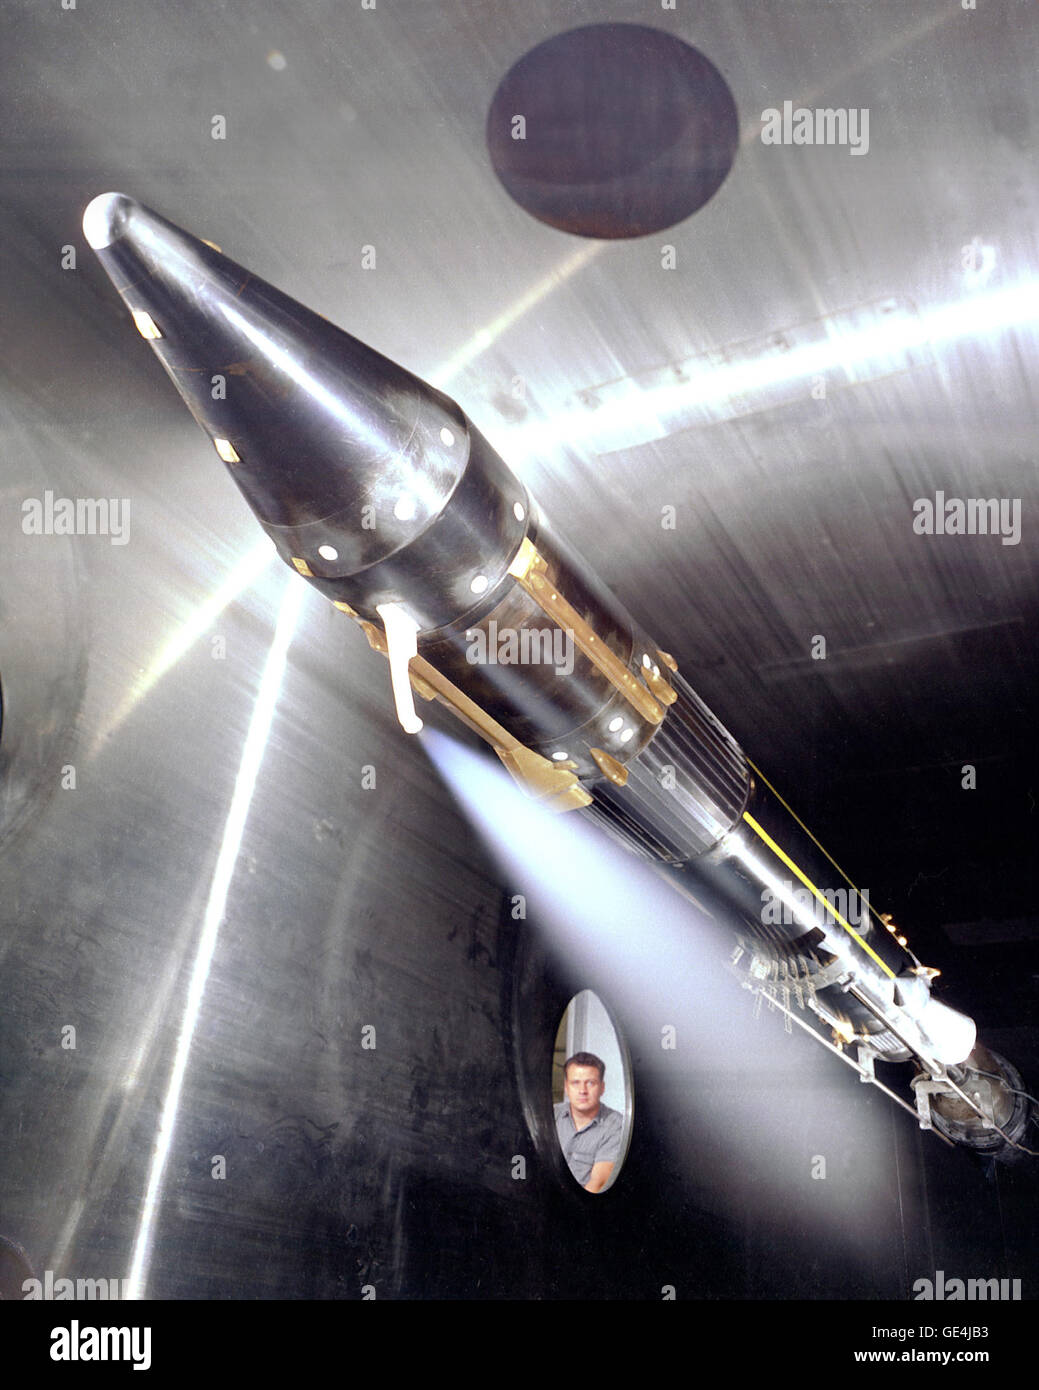 (September 6, 1963) Vent flowing cryogenic fuel and T/C Rake mounted on a 1/10 scale model Centaur in the l0 x l0 Foot Supersonic Wind Tunnel. The fuel being used is liquid hydrogen. The point of the test is to determine how far to expel venting fuel from the rocket body to prevent explosion at the base of the vehicle. This vent is used as a safety valve for the fumes created when loading the fuel tanks during launch preparation. Liquid hydrogen has to be kept at a very low temperature. As it heats, it turns to gas and increases pressure in the tank. It therefore has to be vented overboard whi Stock Photo